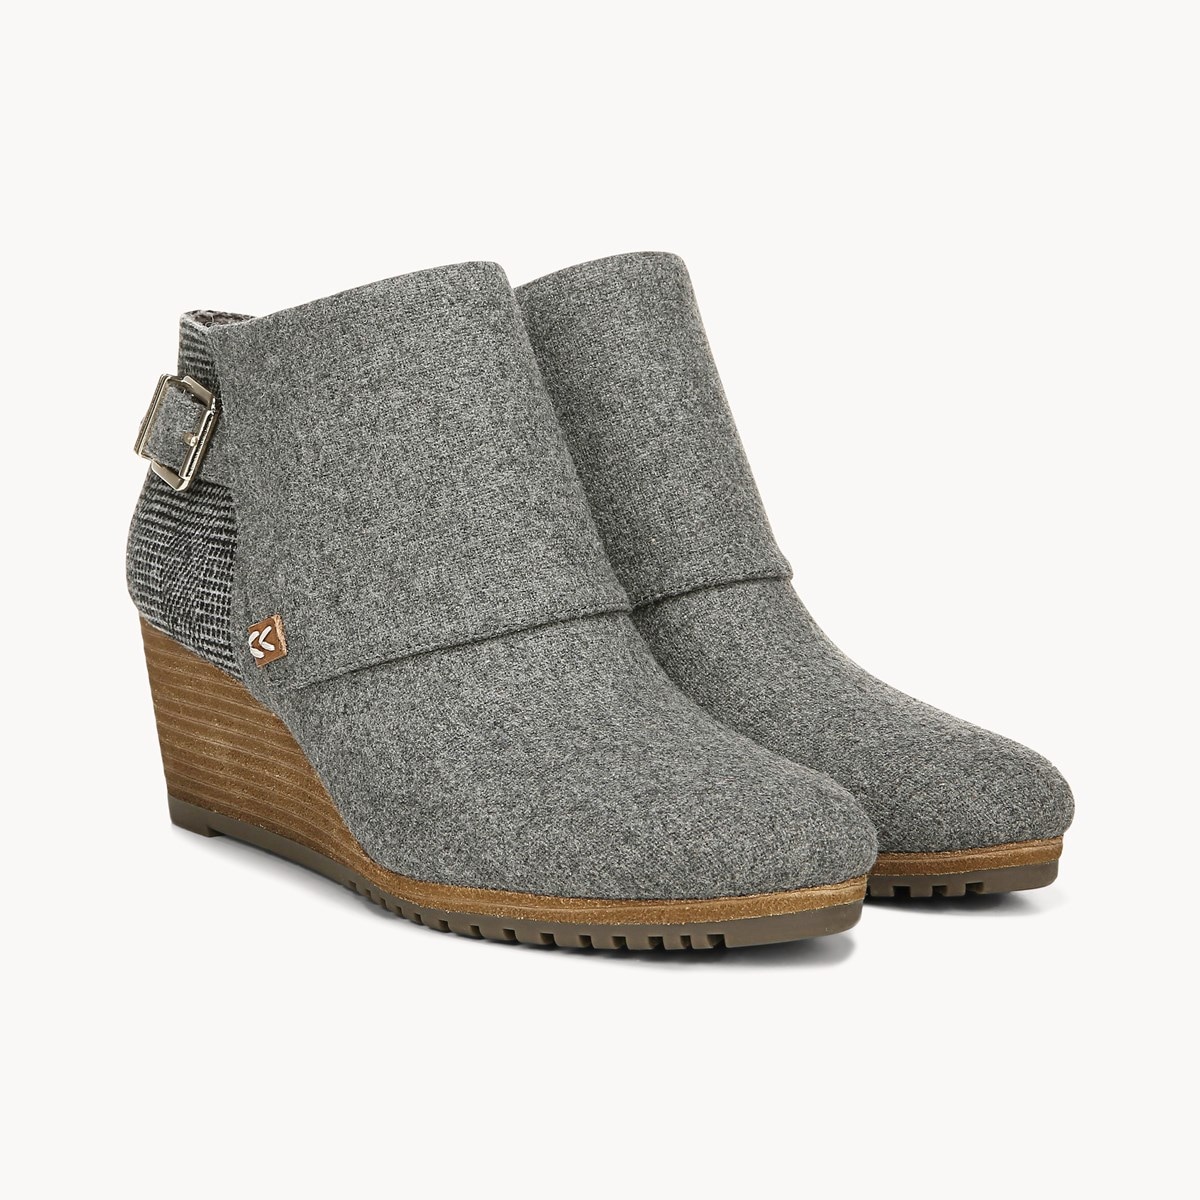 American Lifestyle Create Wedge Bootie 